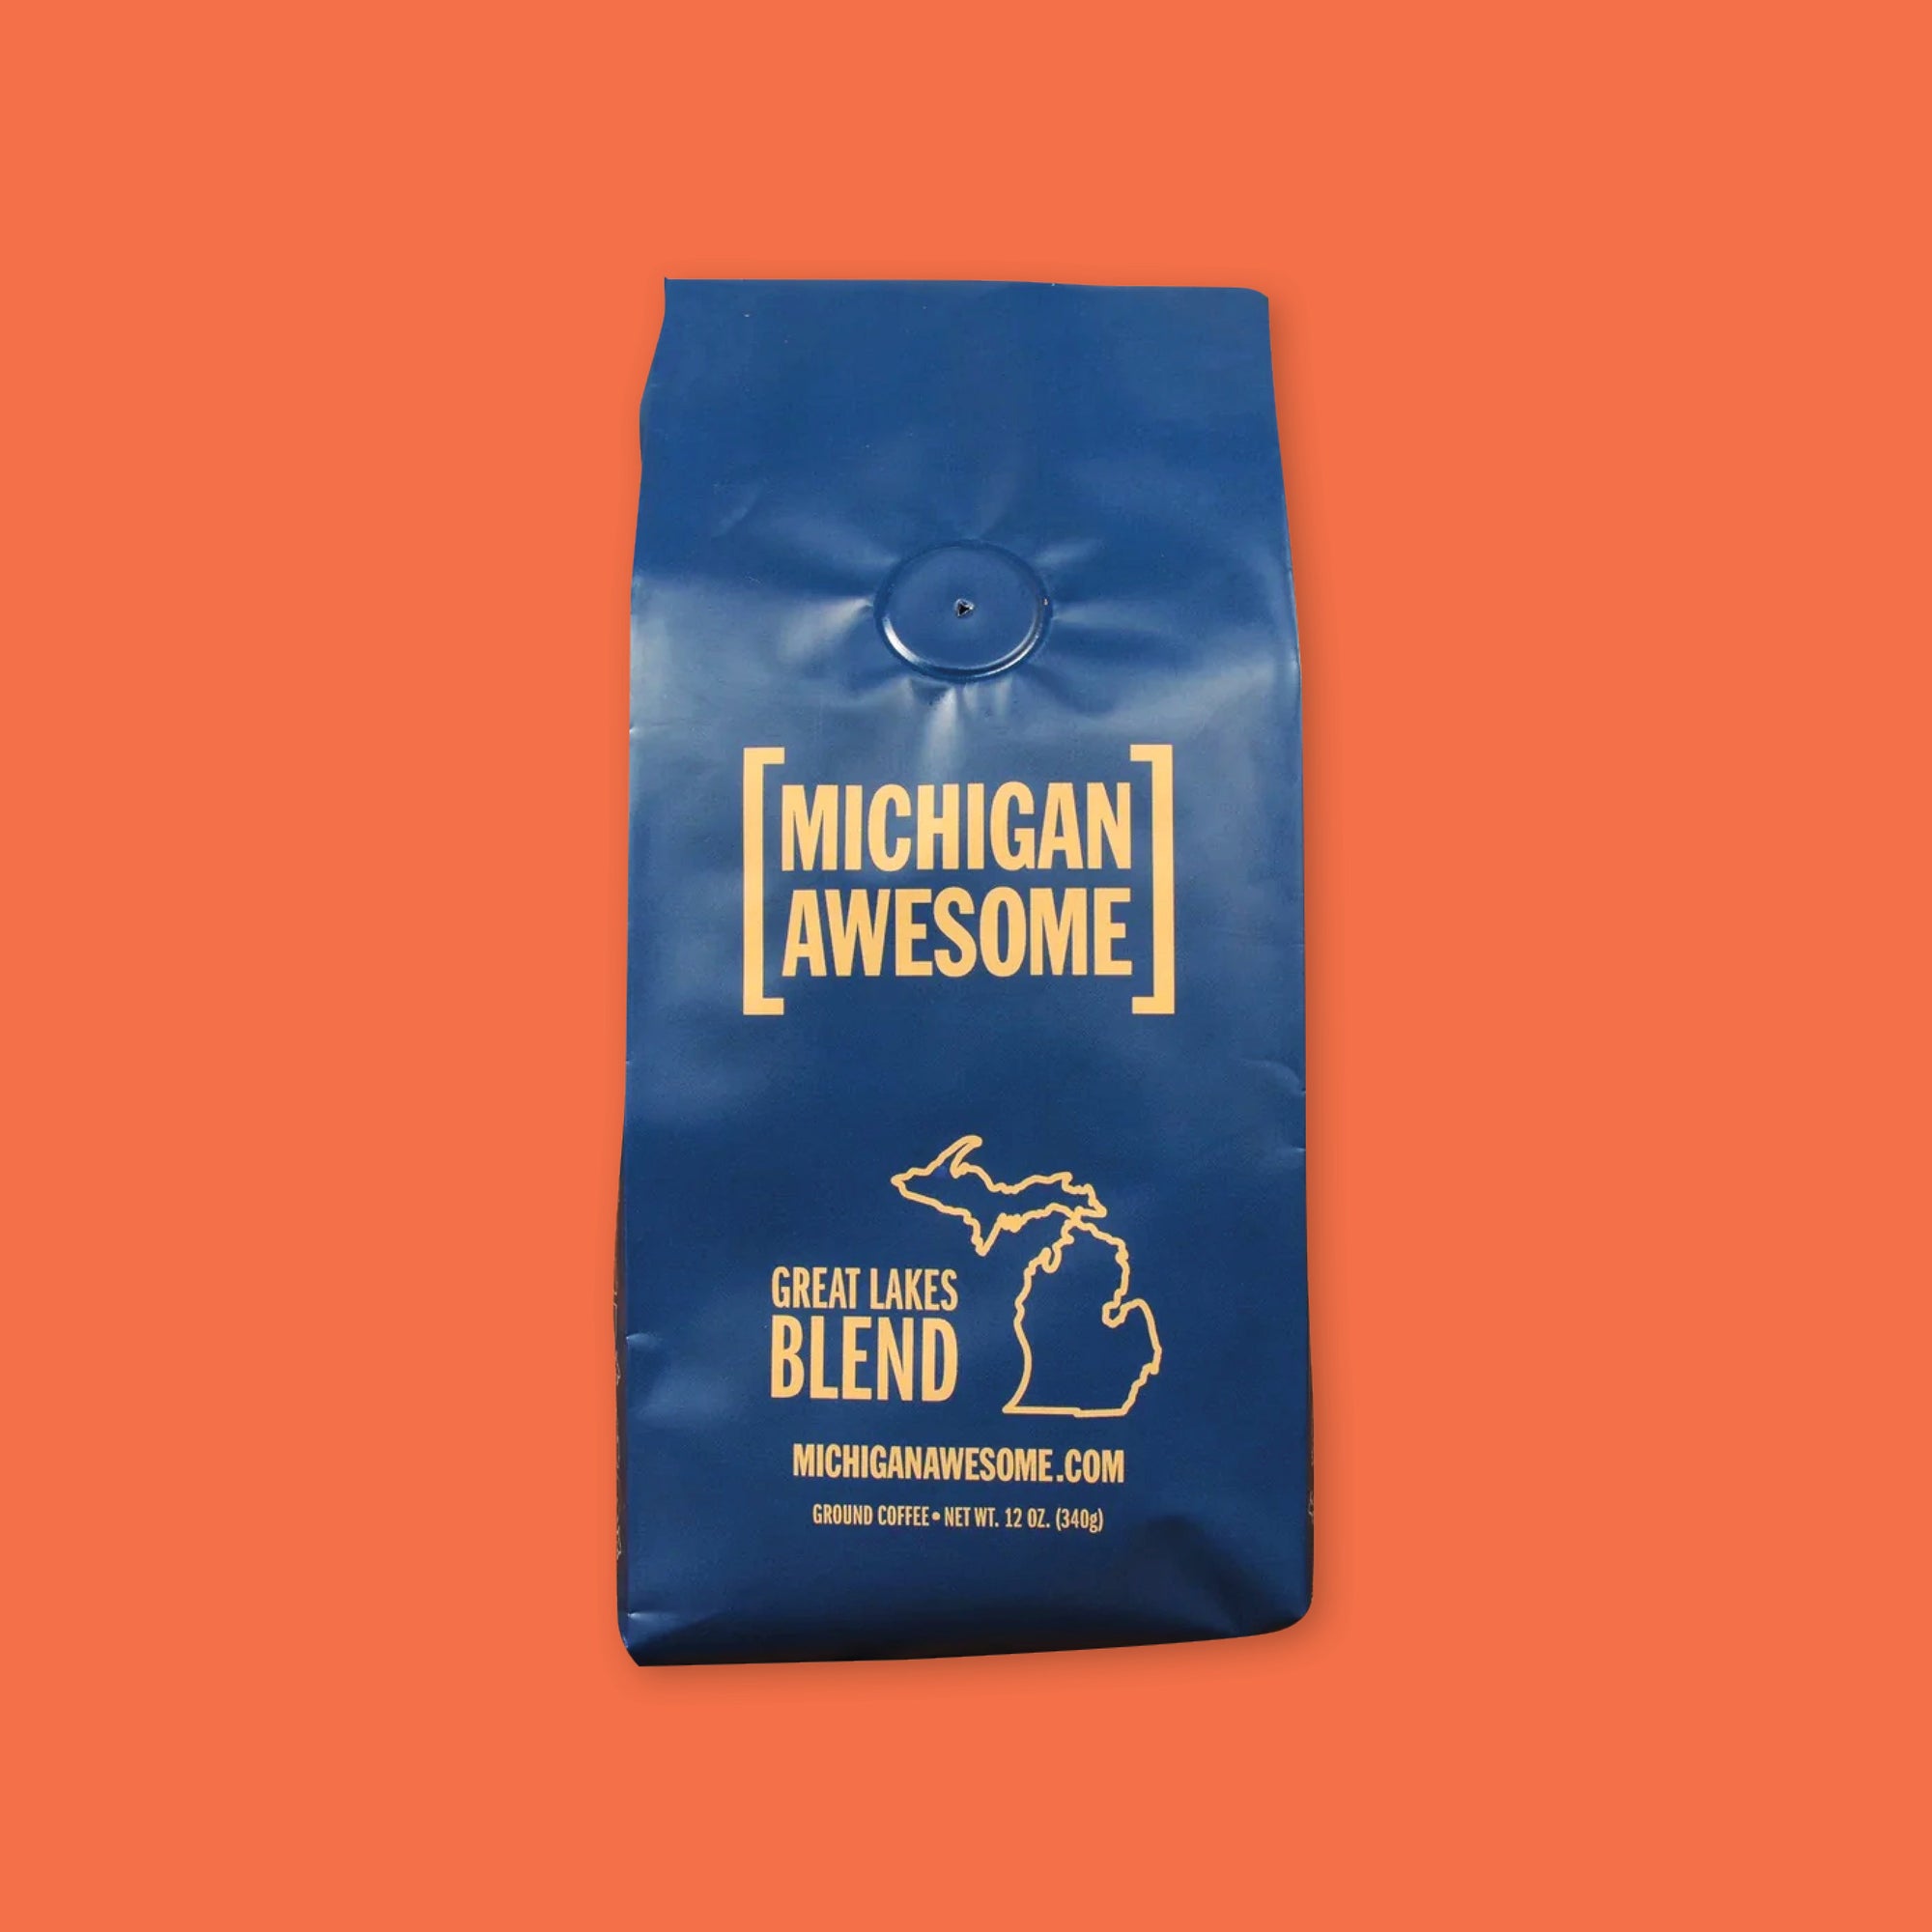 On an orangey-red backdrop is a navy blue bag of coffee is Michigan Awesome brand Great Lakes Blend. Ground coffee. 12 oz (350 g)